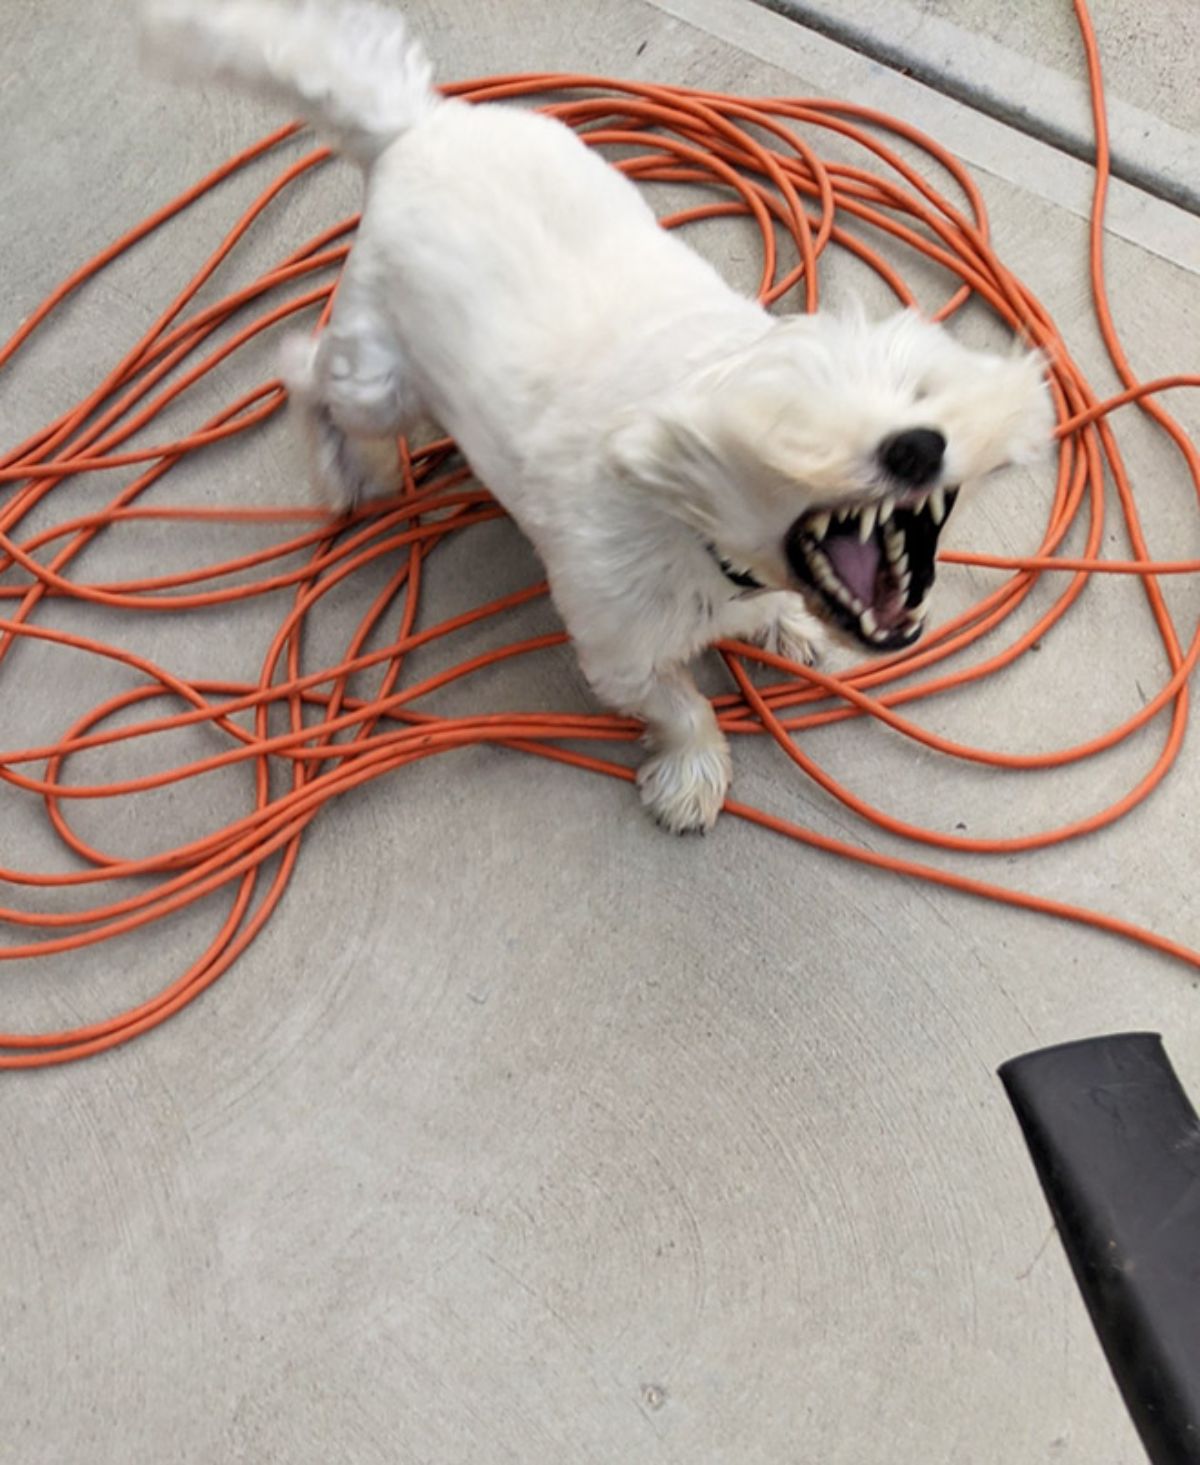 fluffy white dog standing on orange wires with the mouth open